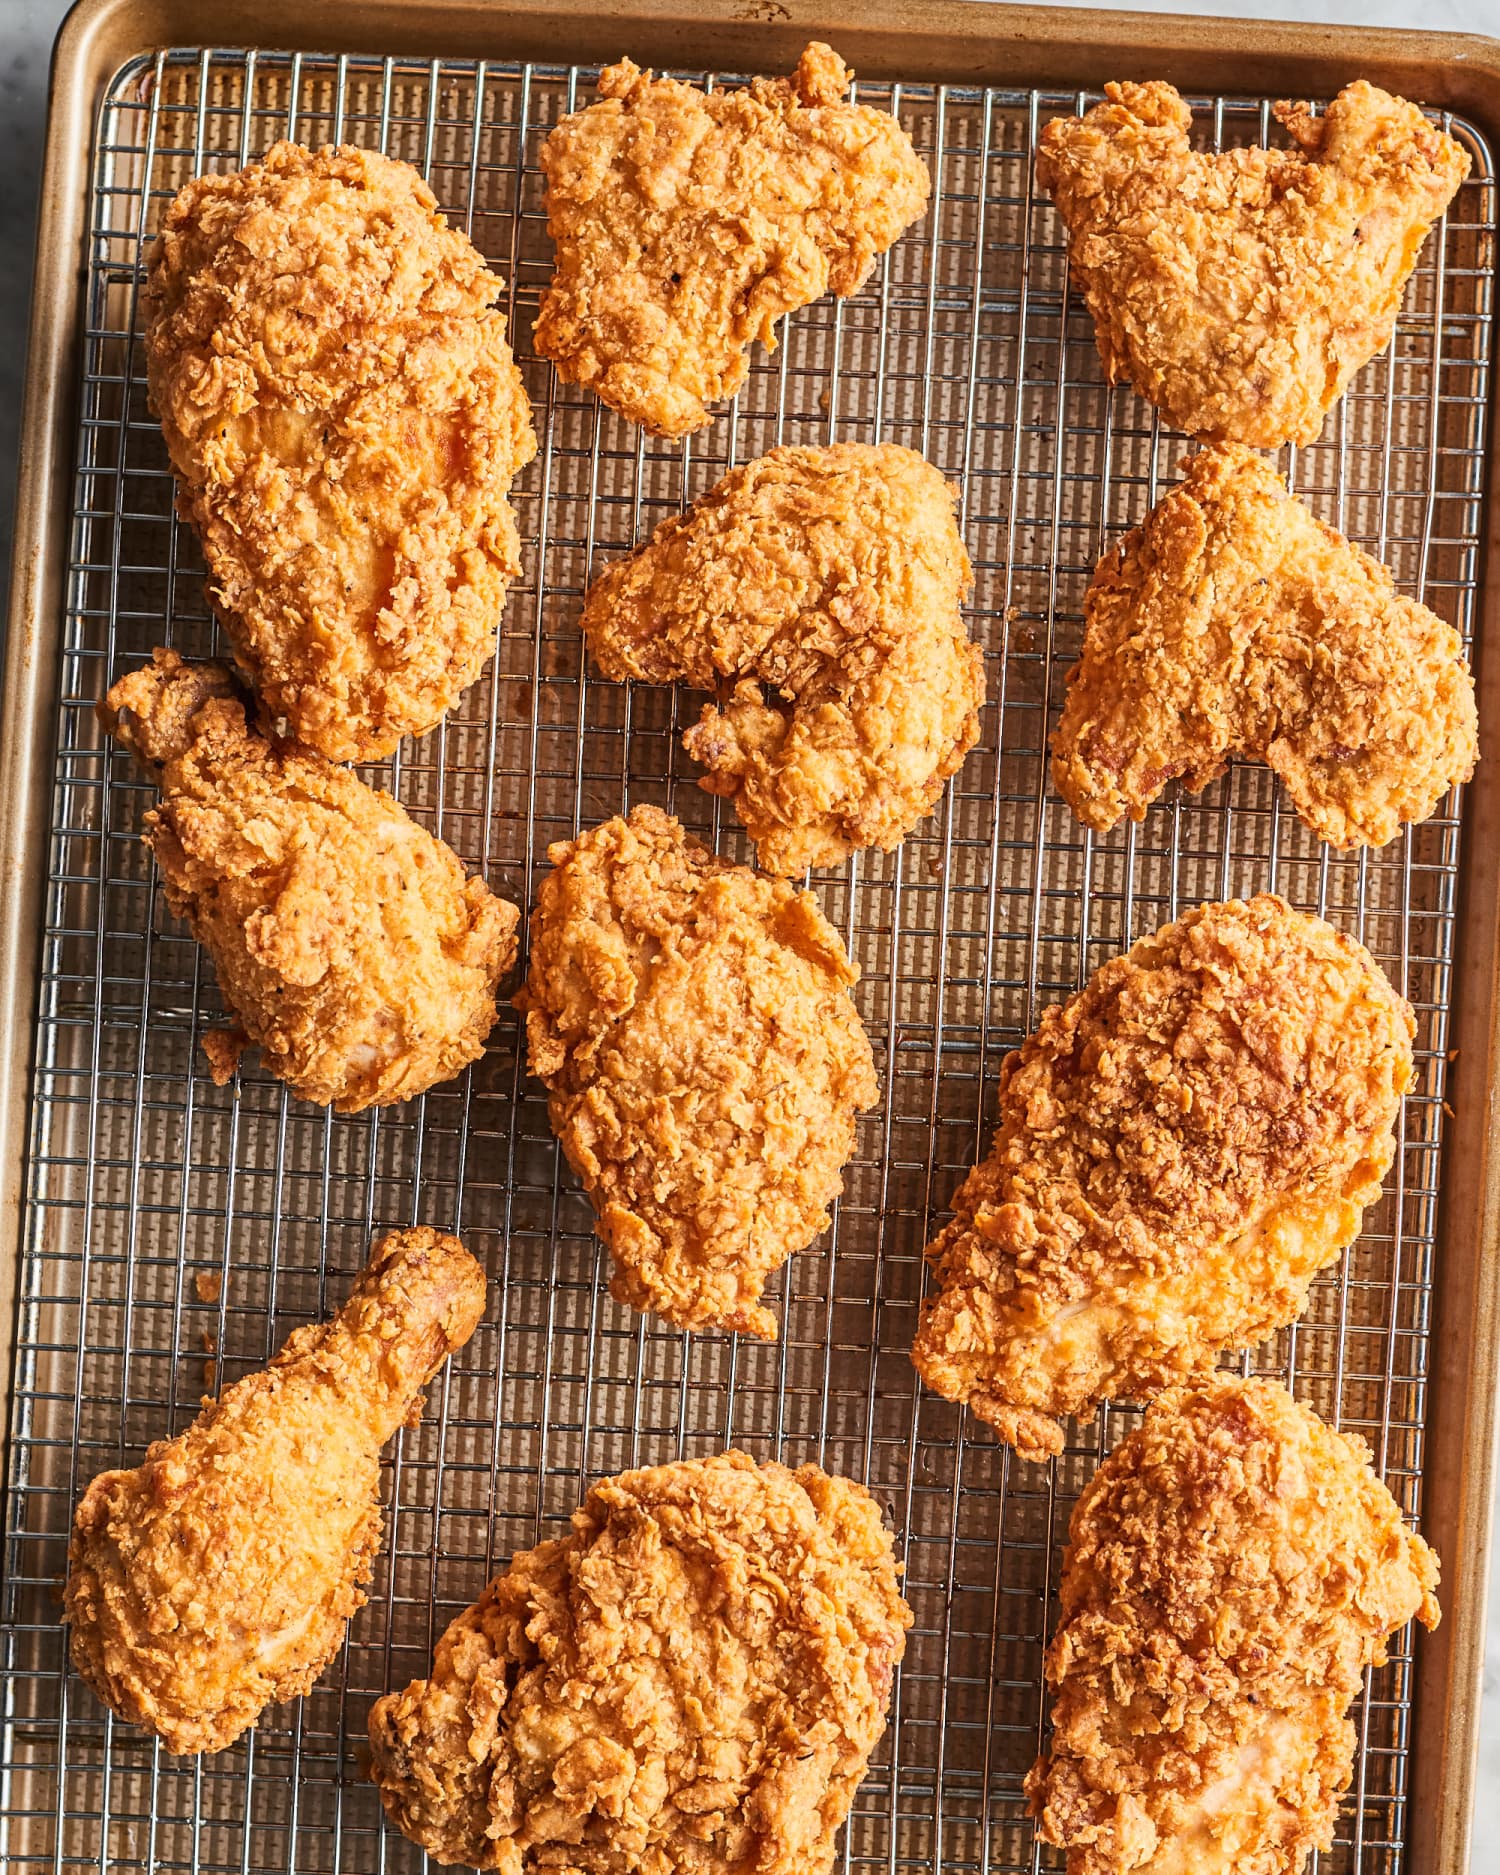 Everyone Just Discovered This Unorthodox Way of Frying Chicken, and People Can’t Believe the Results